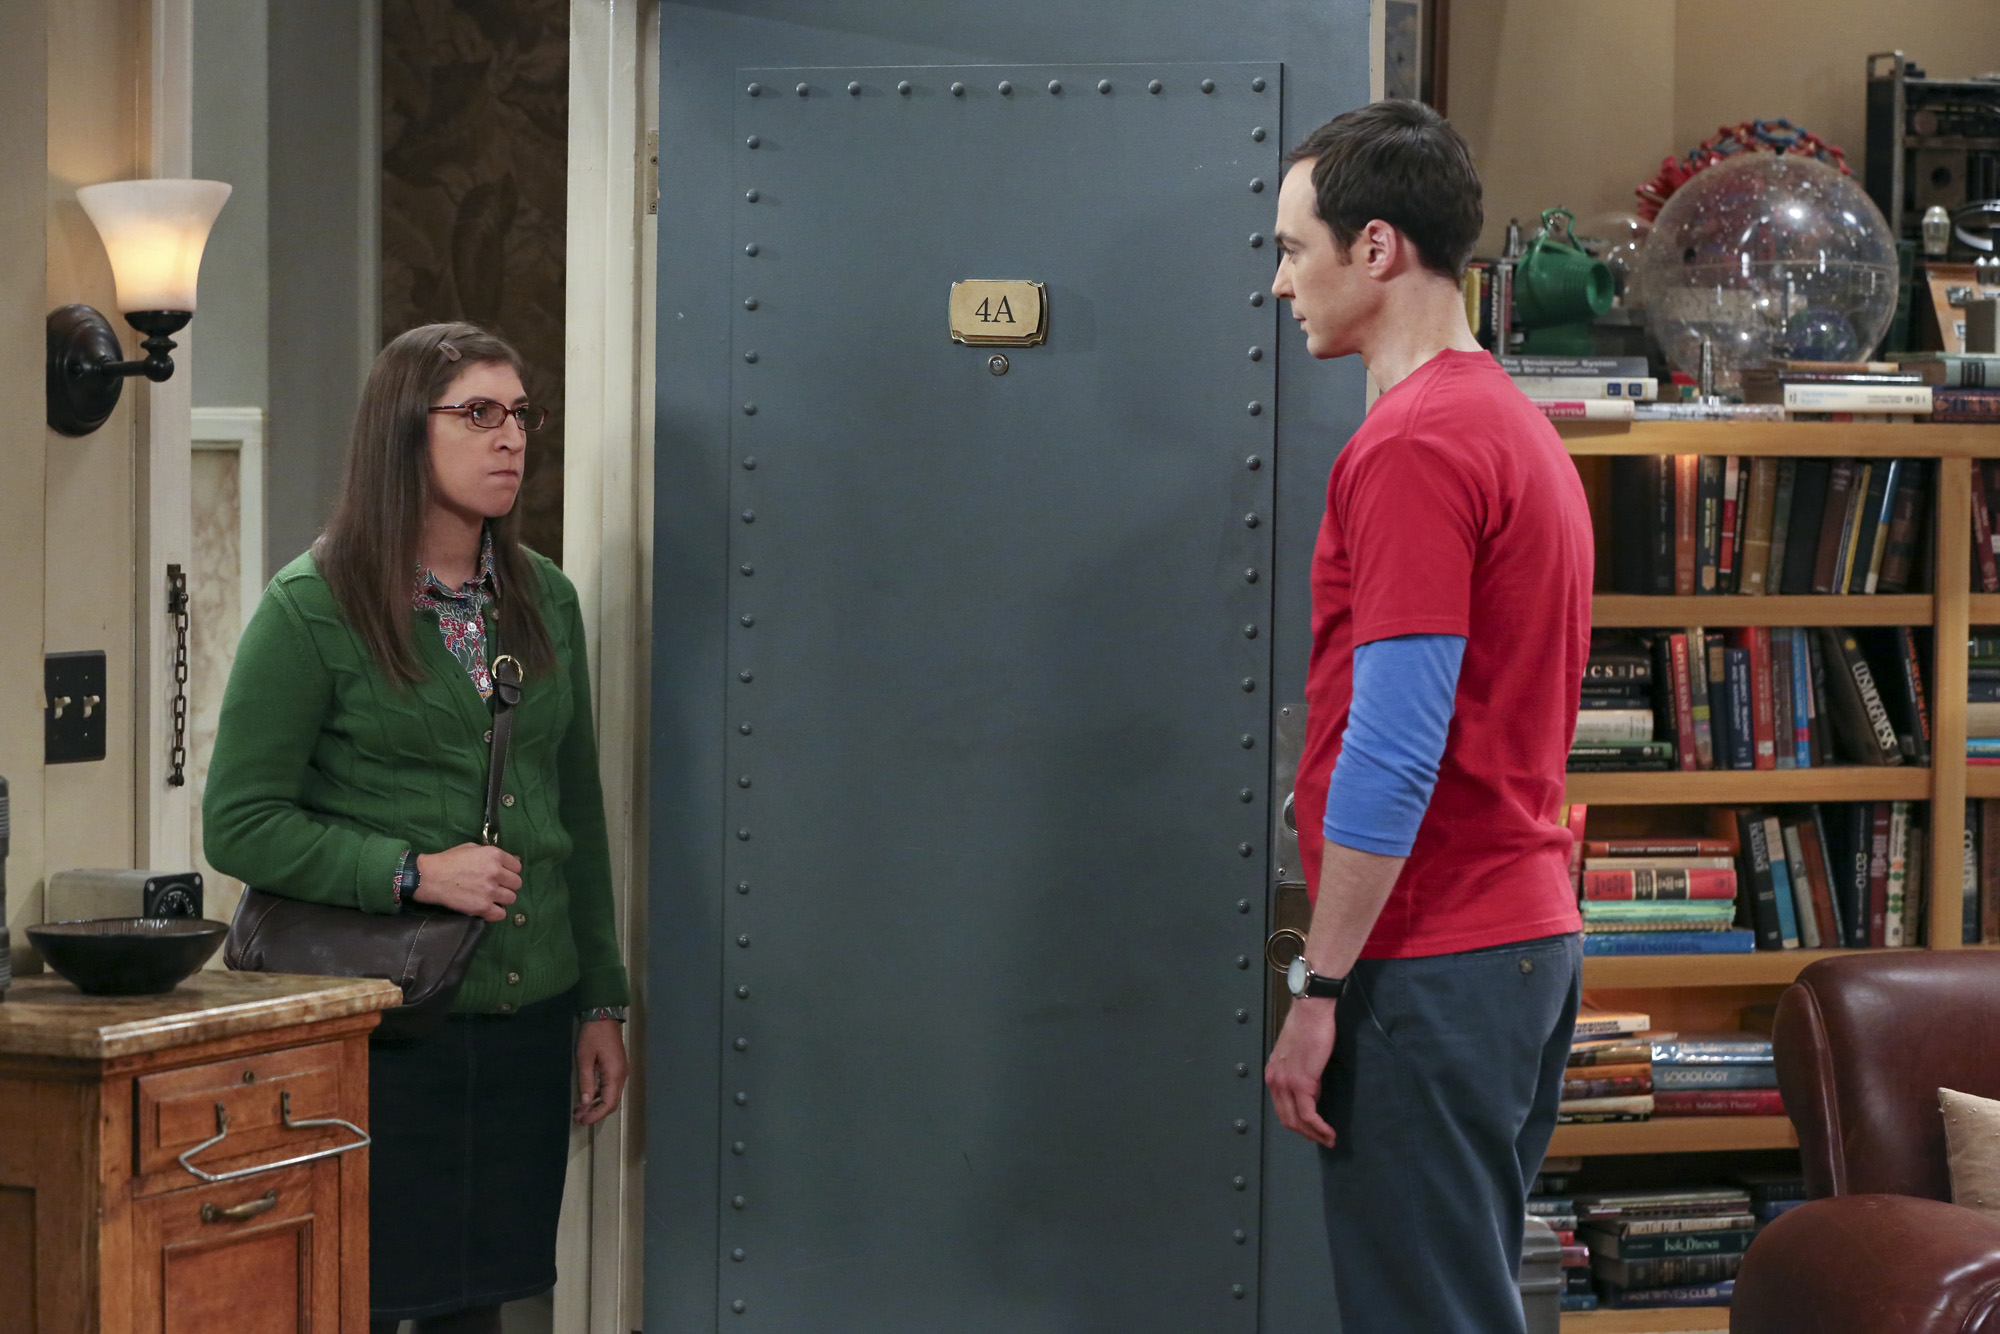 The Separation Oscillation" -- Sheldon (Jim Parsons, right) films a special episode of "Fun with Flags" after his breakup with Amy (Mayim Bialik, left), on THE BIG BANG THEORY, Monday, Sept. 28 (8:00-8:31 PM, ET/PT), on the CBS Television Network. Photo: Michael Yarish/Warner Bros. Entertainment Inc. © 2015 WBEI. All rights reserved.